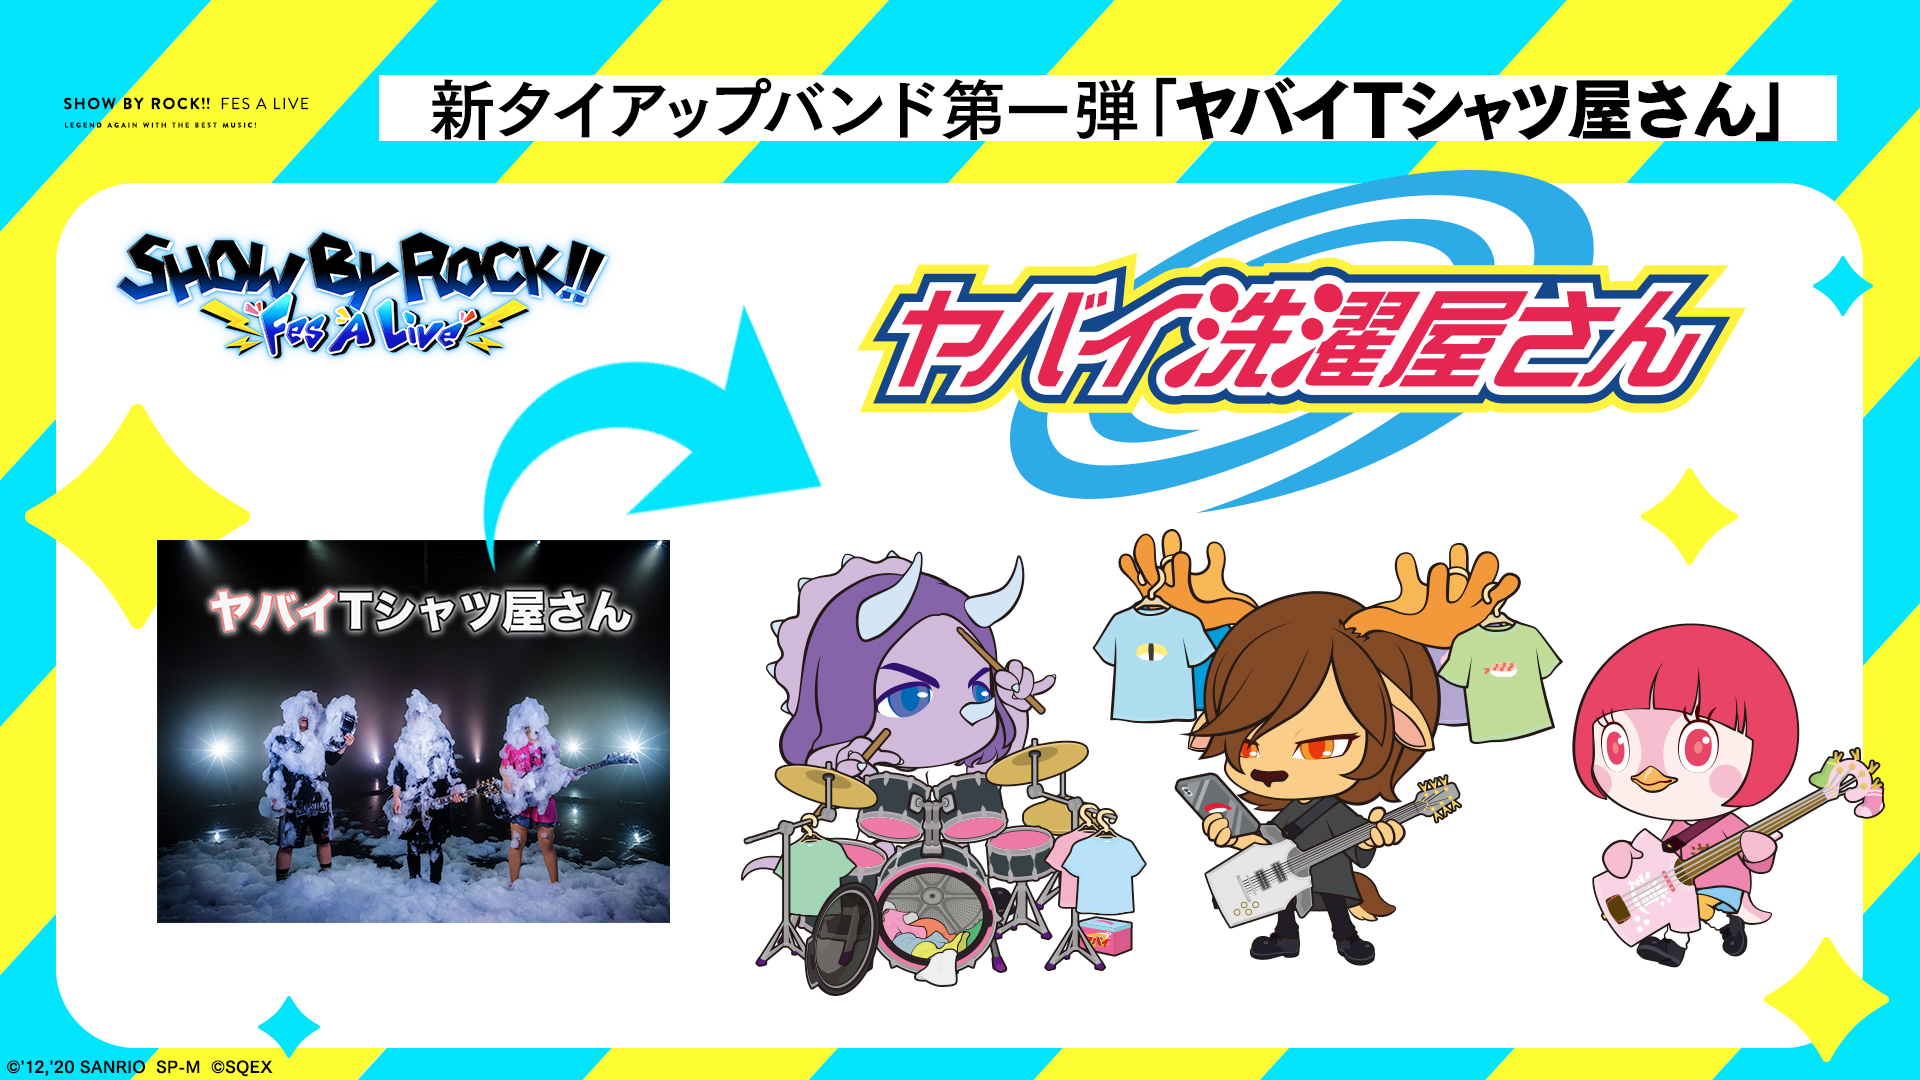 『SHOW BY ROCK!! Fes A Live』と「ヤバイ T シャツ屋さん」タイアップ